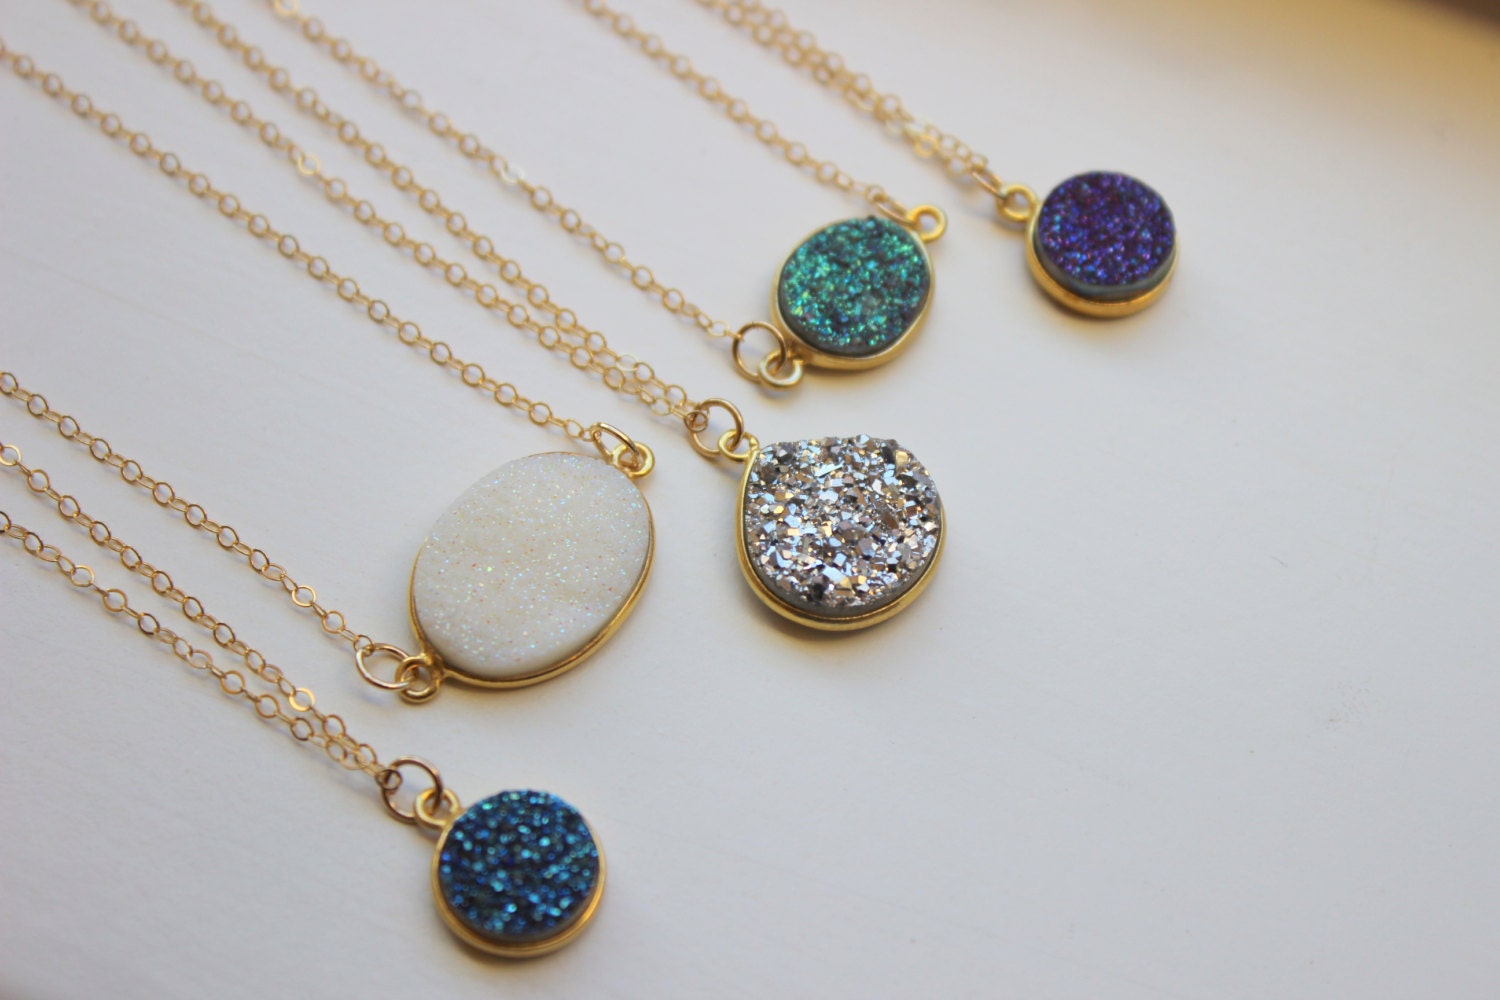 Gold Druzy Necklace Natural Druzy Jewelry - Drusy Necklace Jewelry Green Purple Silver Blue White Christmas Gift Layering Statement Jewelry